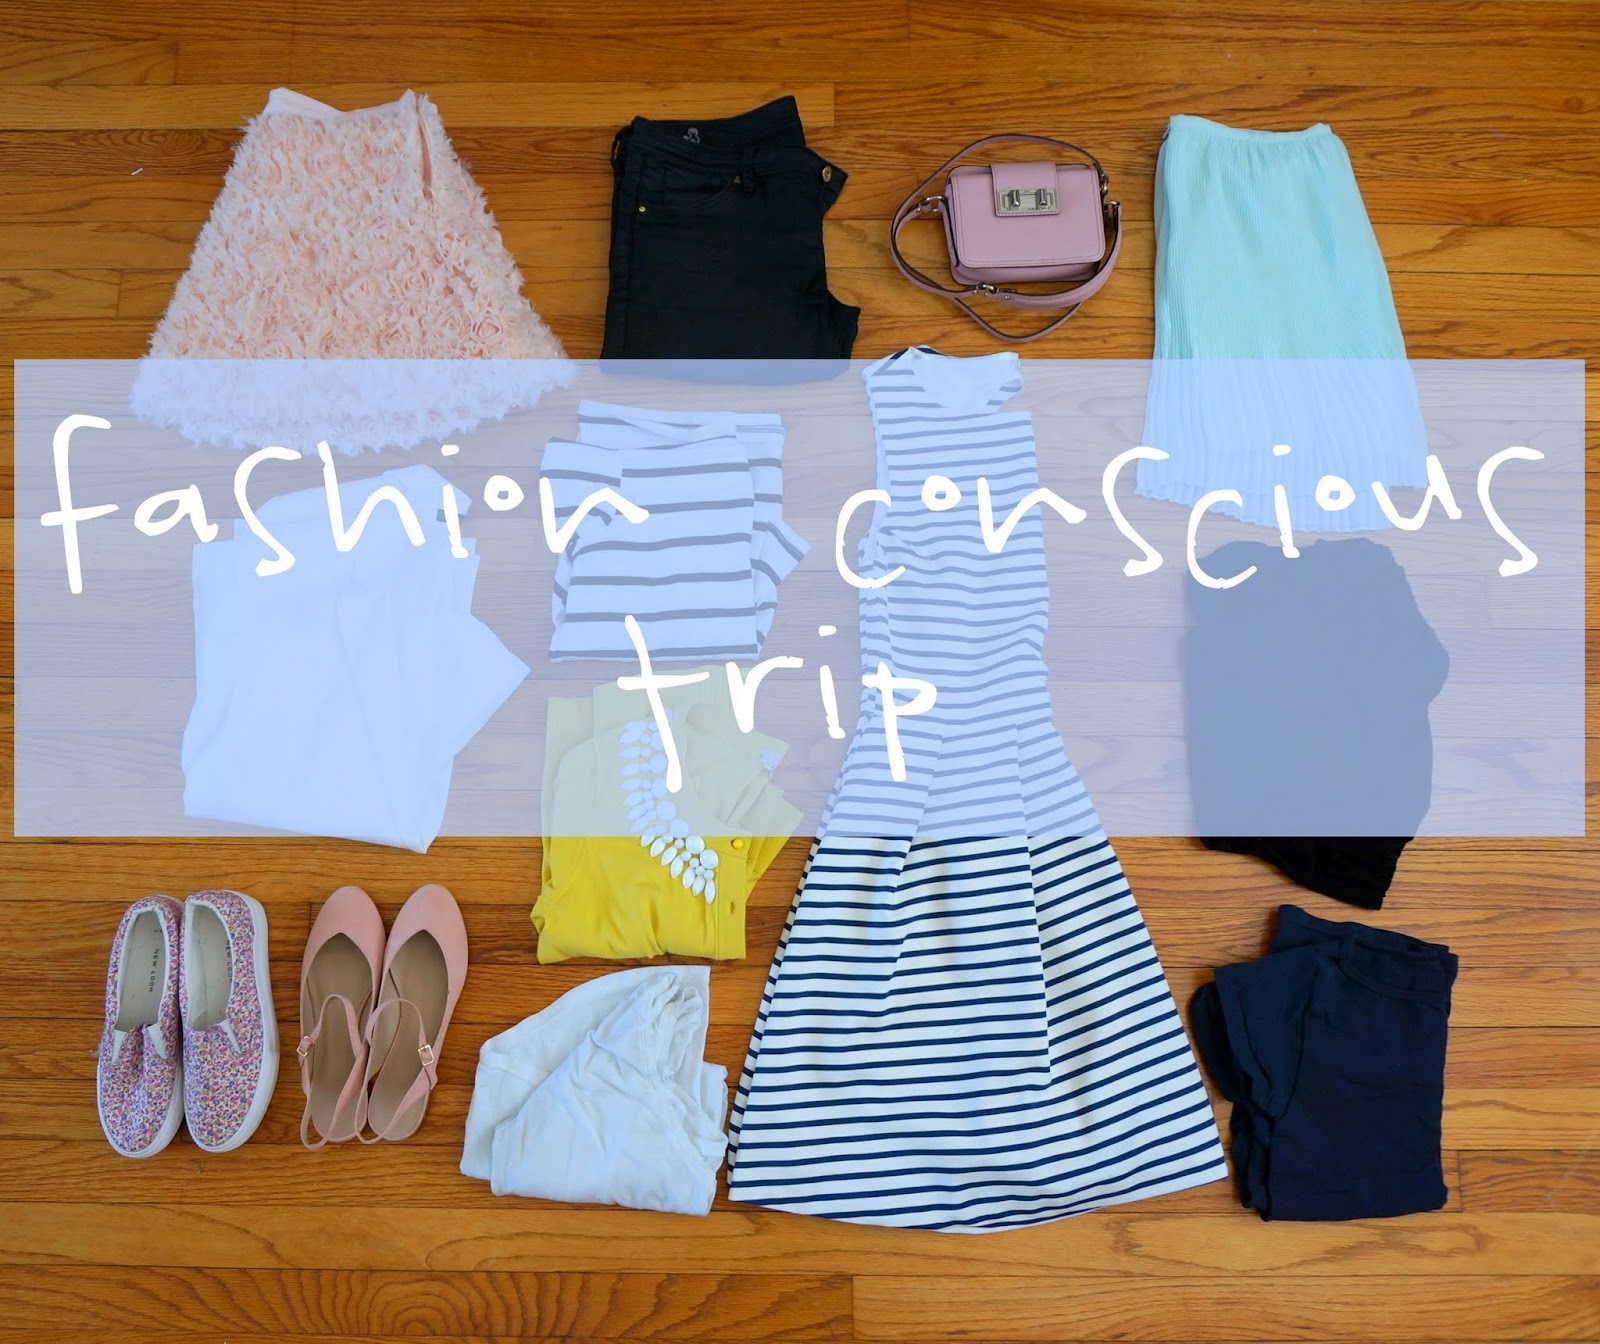 How To: Plan Outfits for Travel